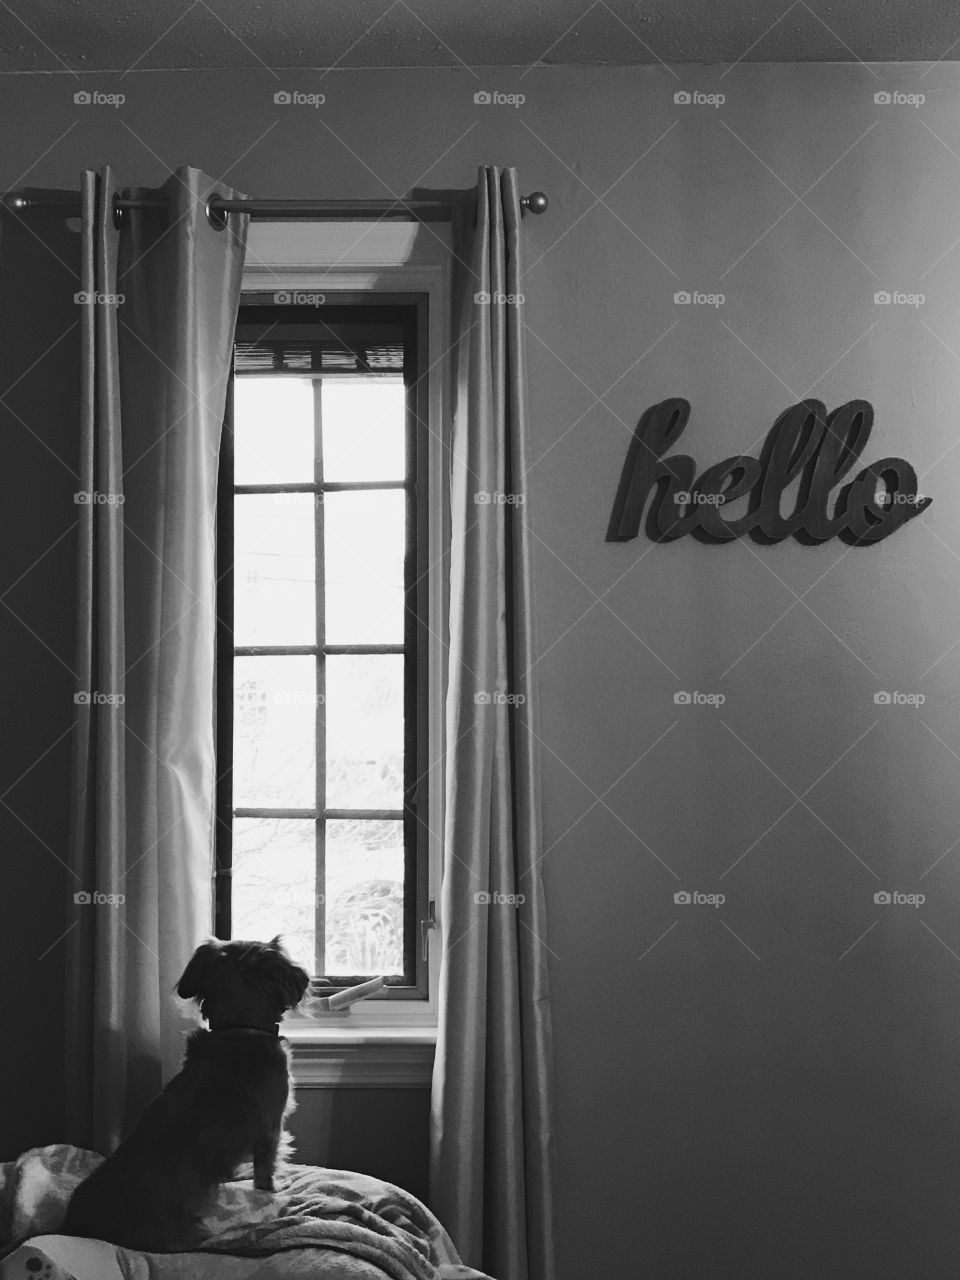 Dachshund dog or puppy looking out window black and white image with hello sign